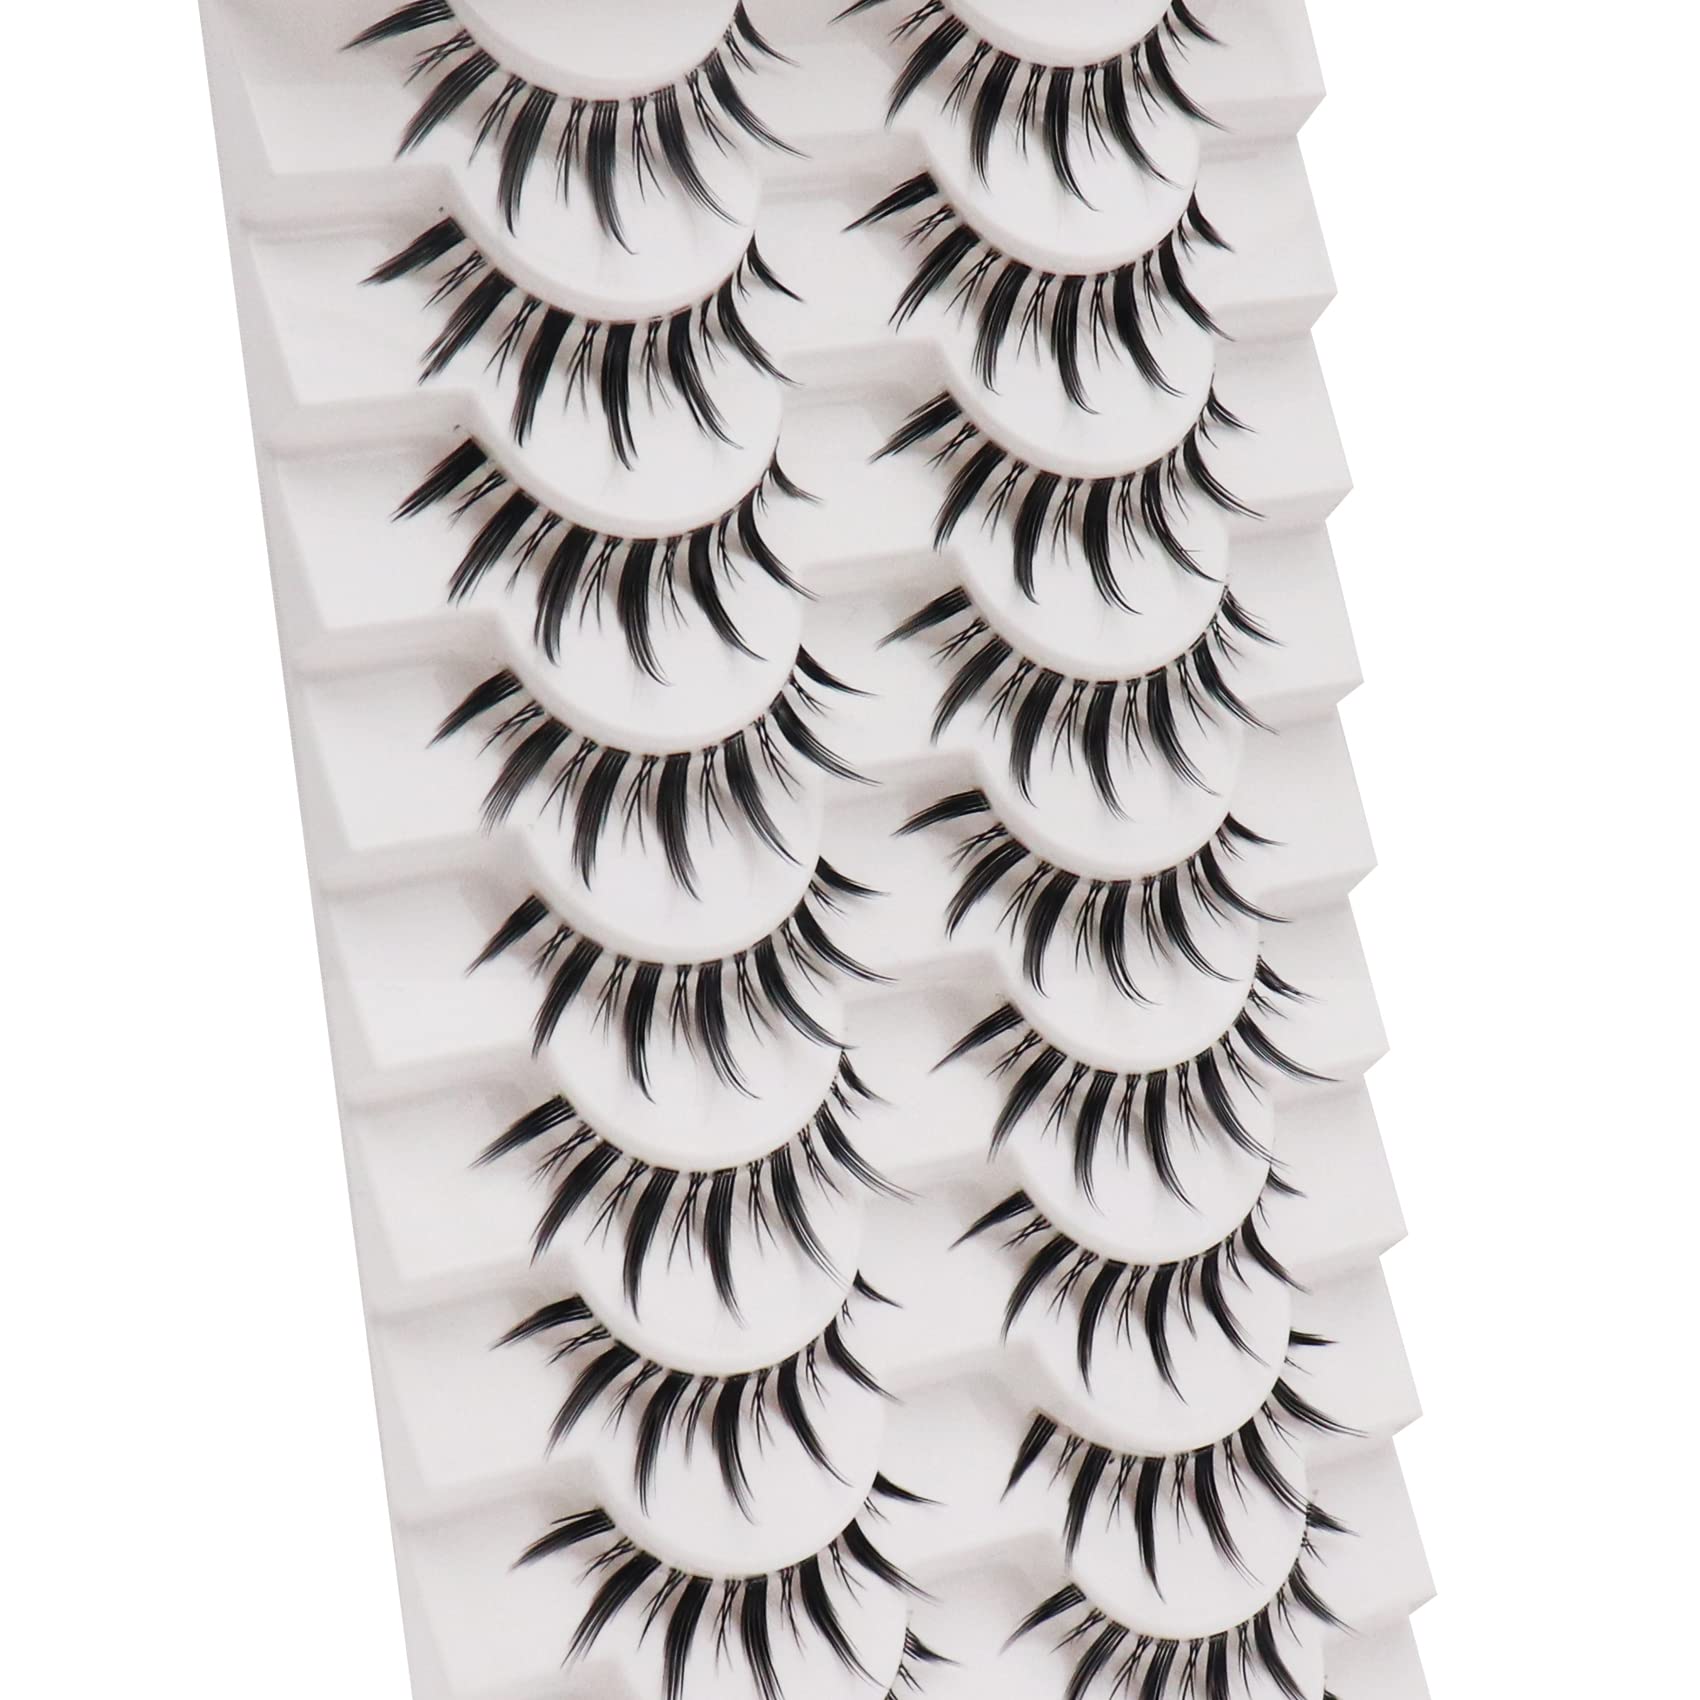 Manga Lashes, Anime Lashes Natural Look Wispy Soft Lashes Look Like Clusters 10 Pairs Pack